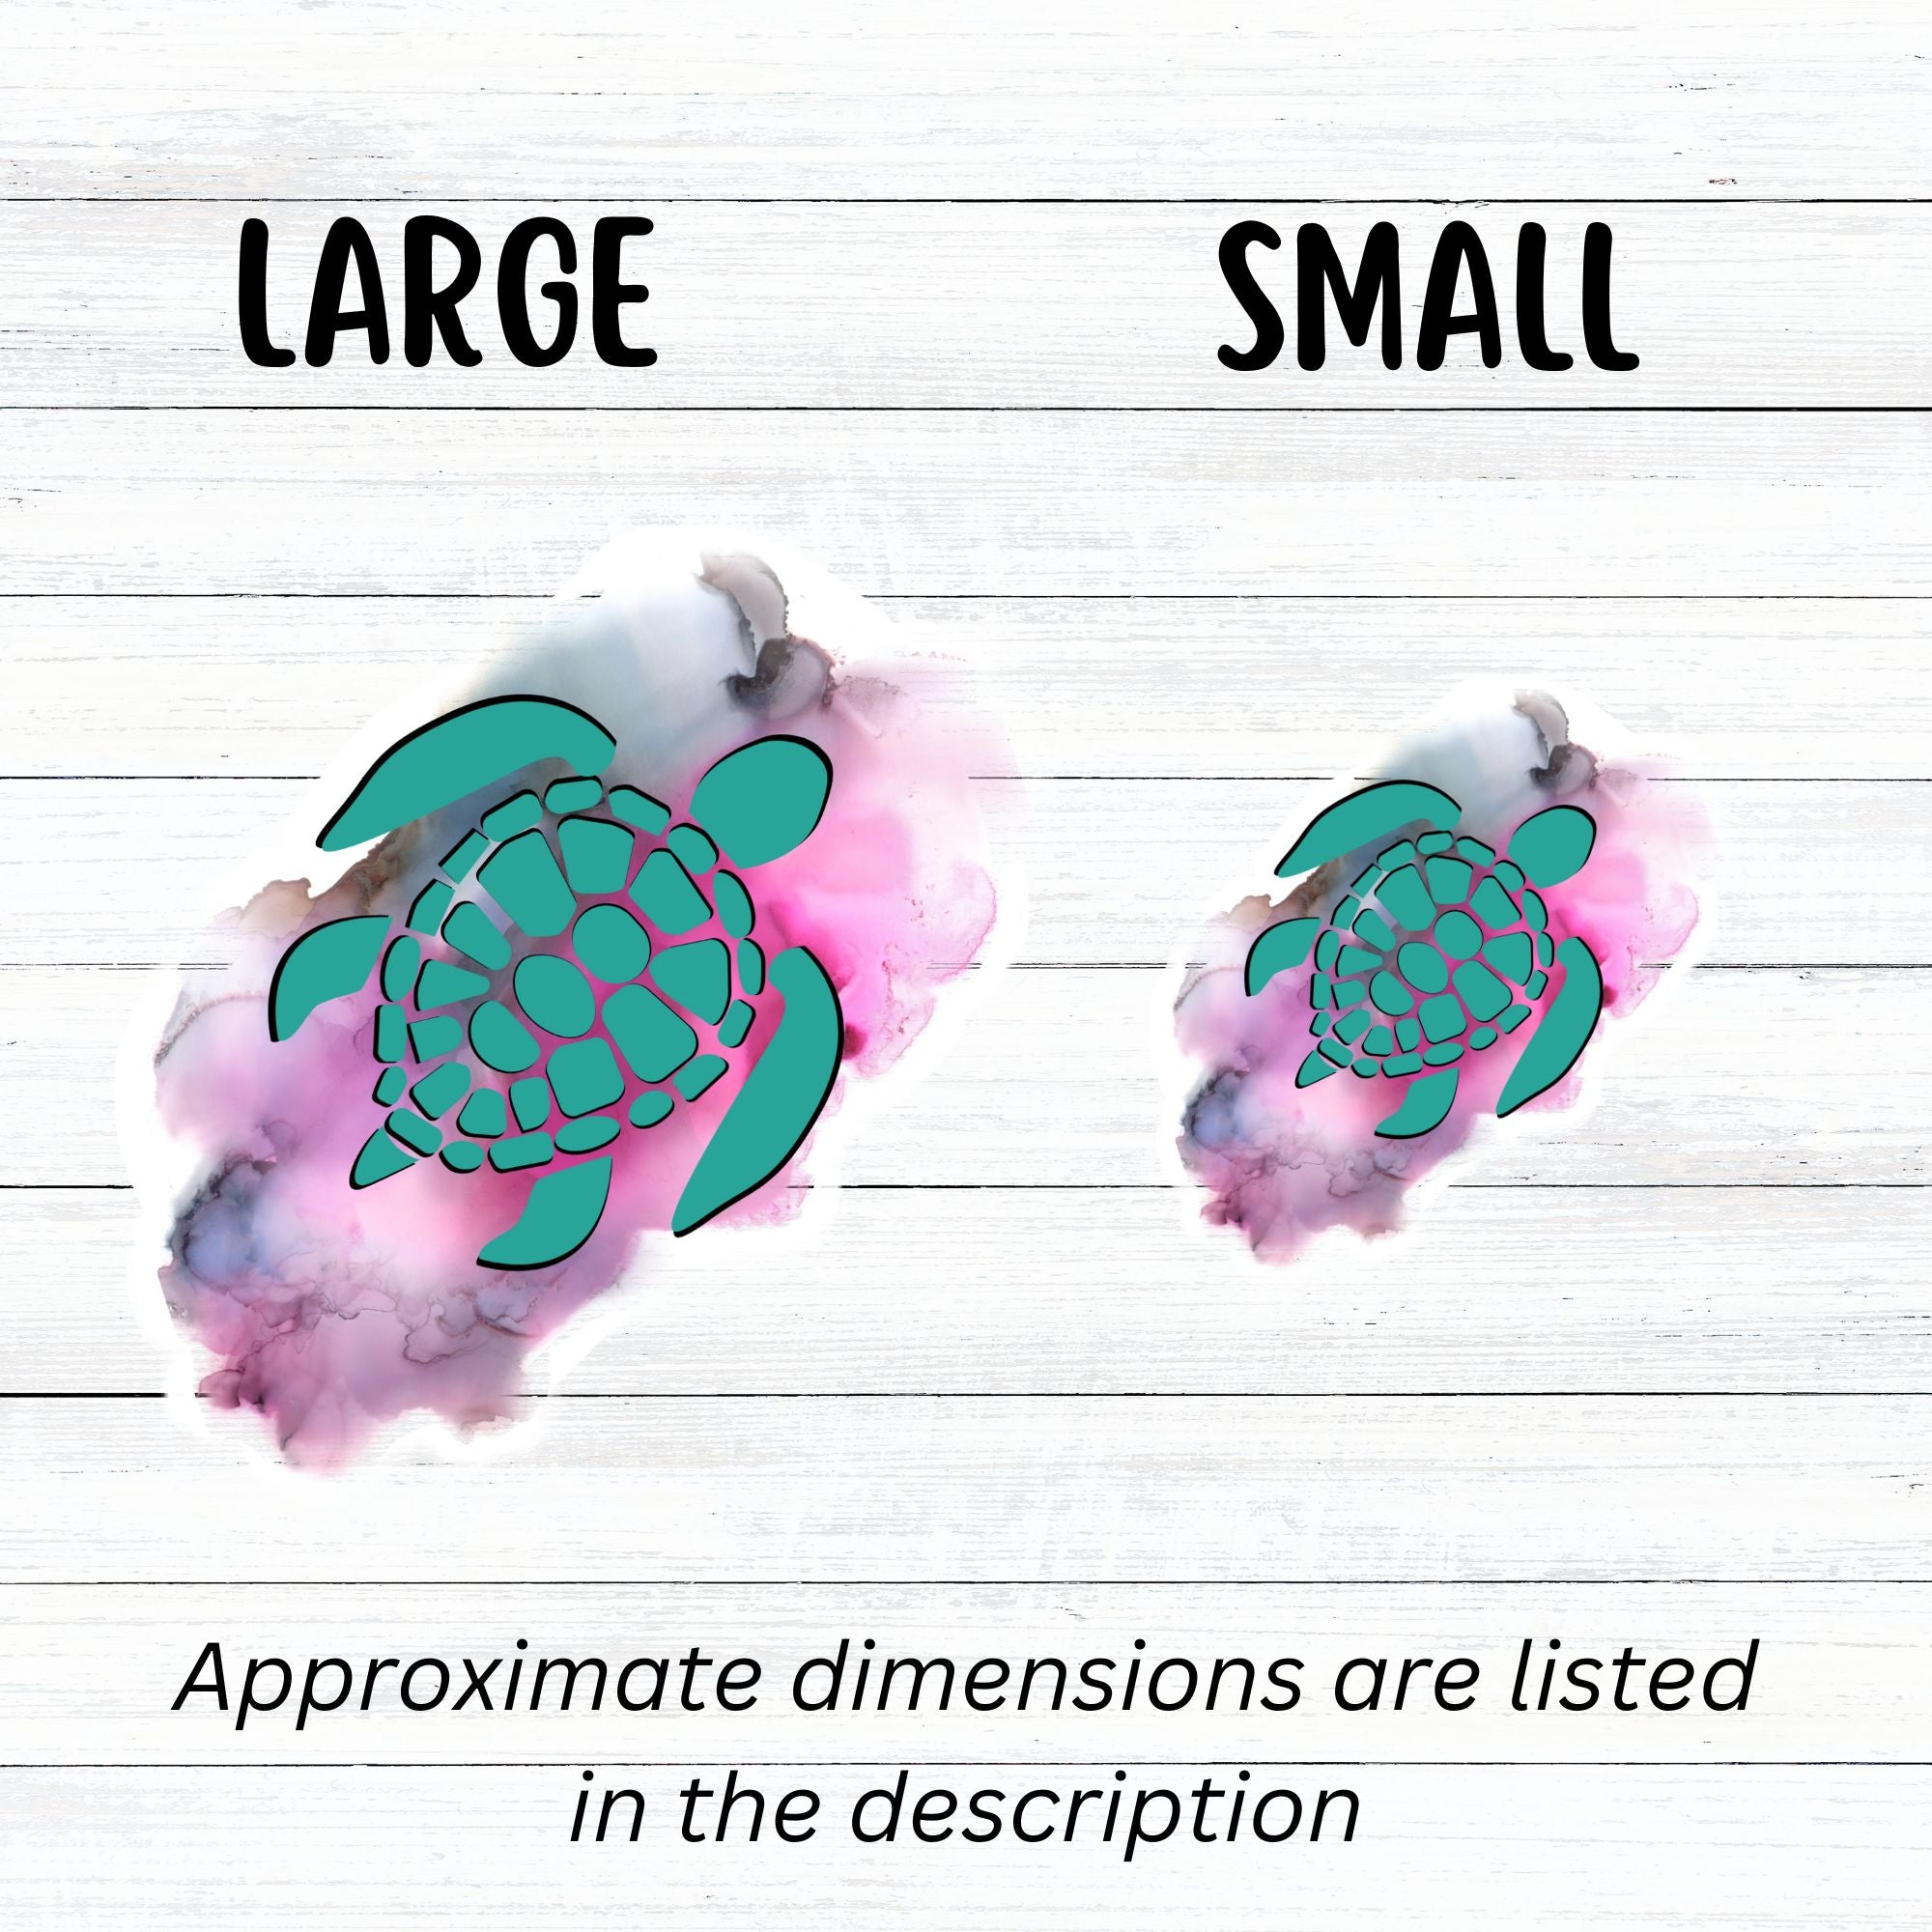 This individual die-cut sticker features a green tribal style turtle on a gray and pink cloudy background. This image shows large and small tribal turtle stickers next to each other.